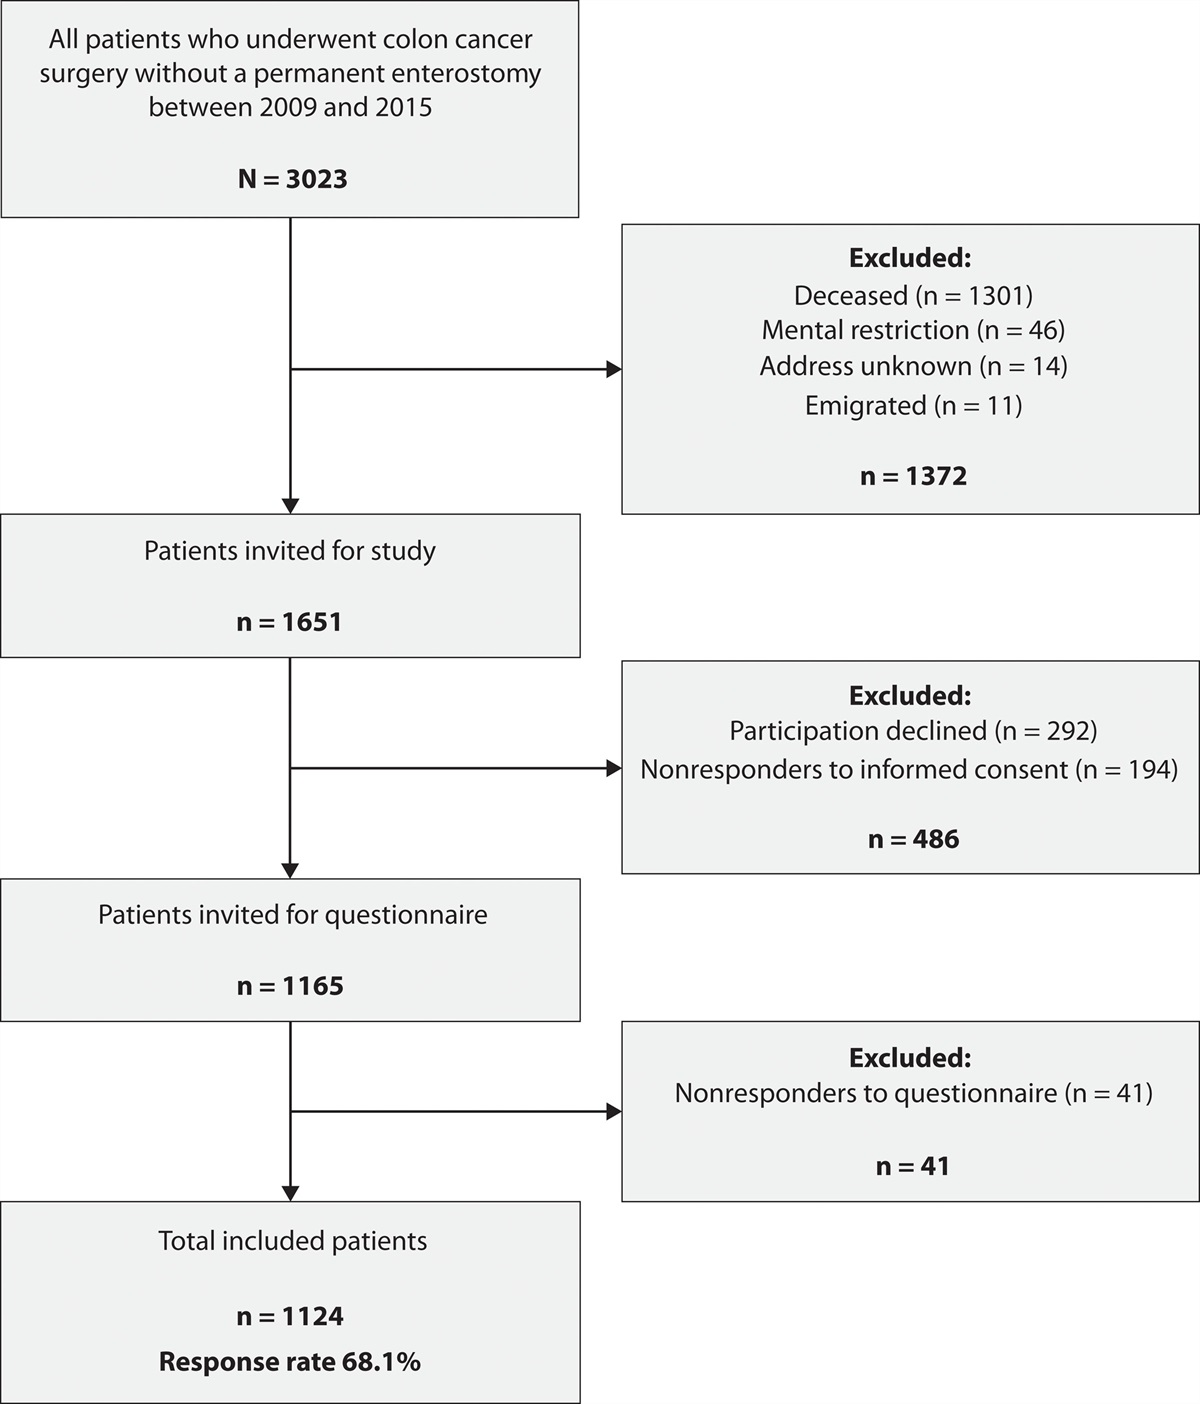 Long-term Bowel Dysfunction and Decline in Quality of Life Following Surgery for Colon Cancer: Call for Personalized Screening and Treatment